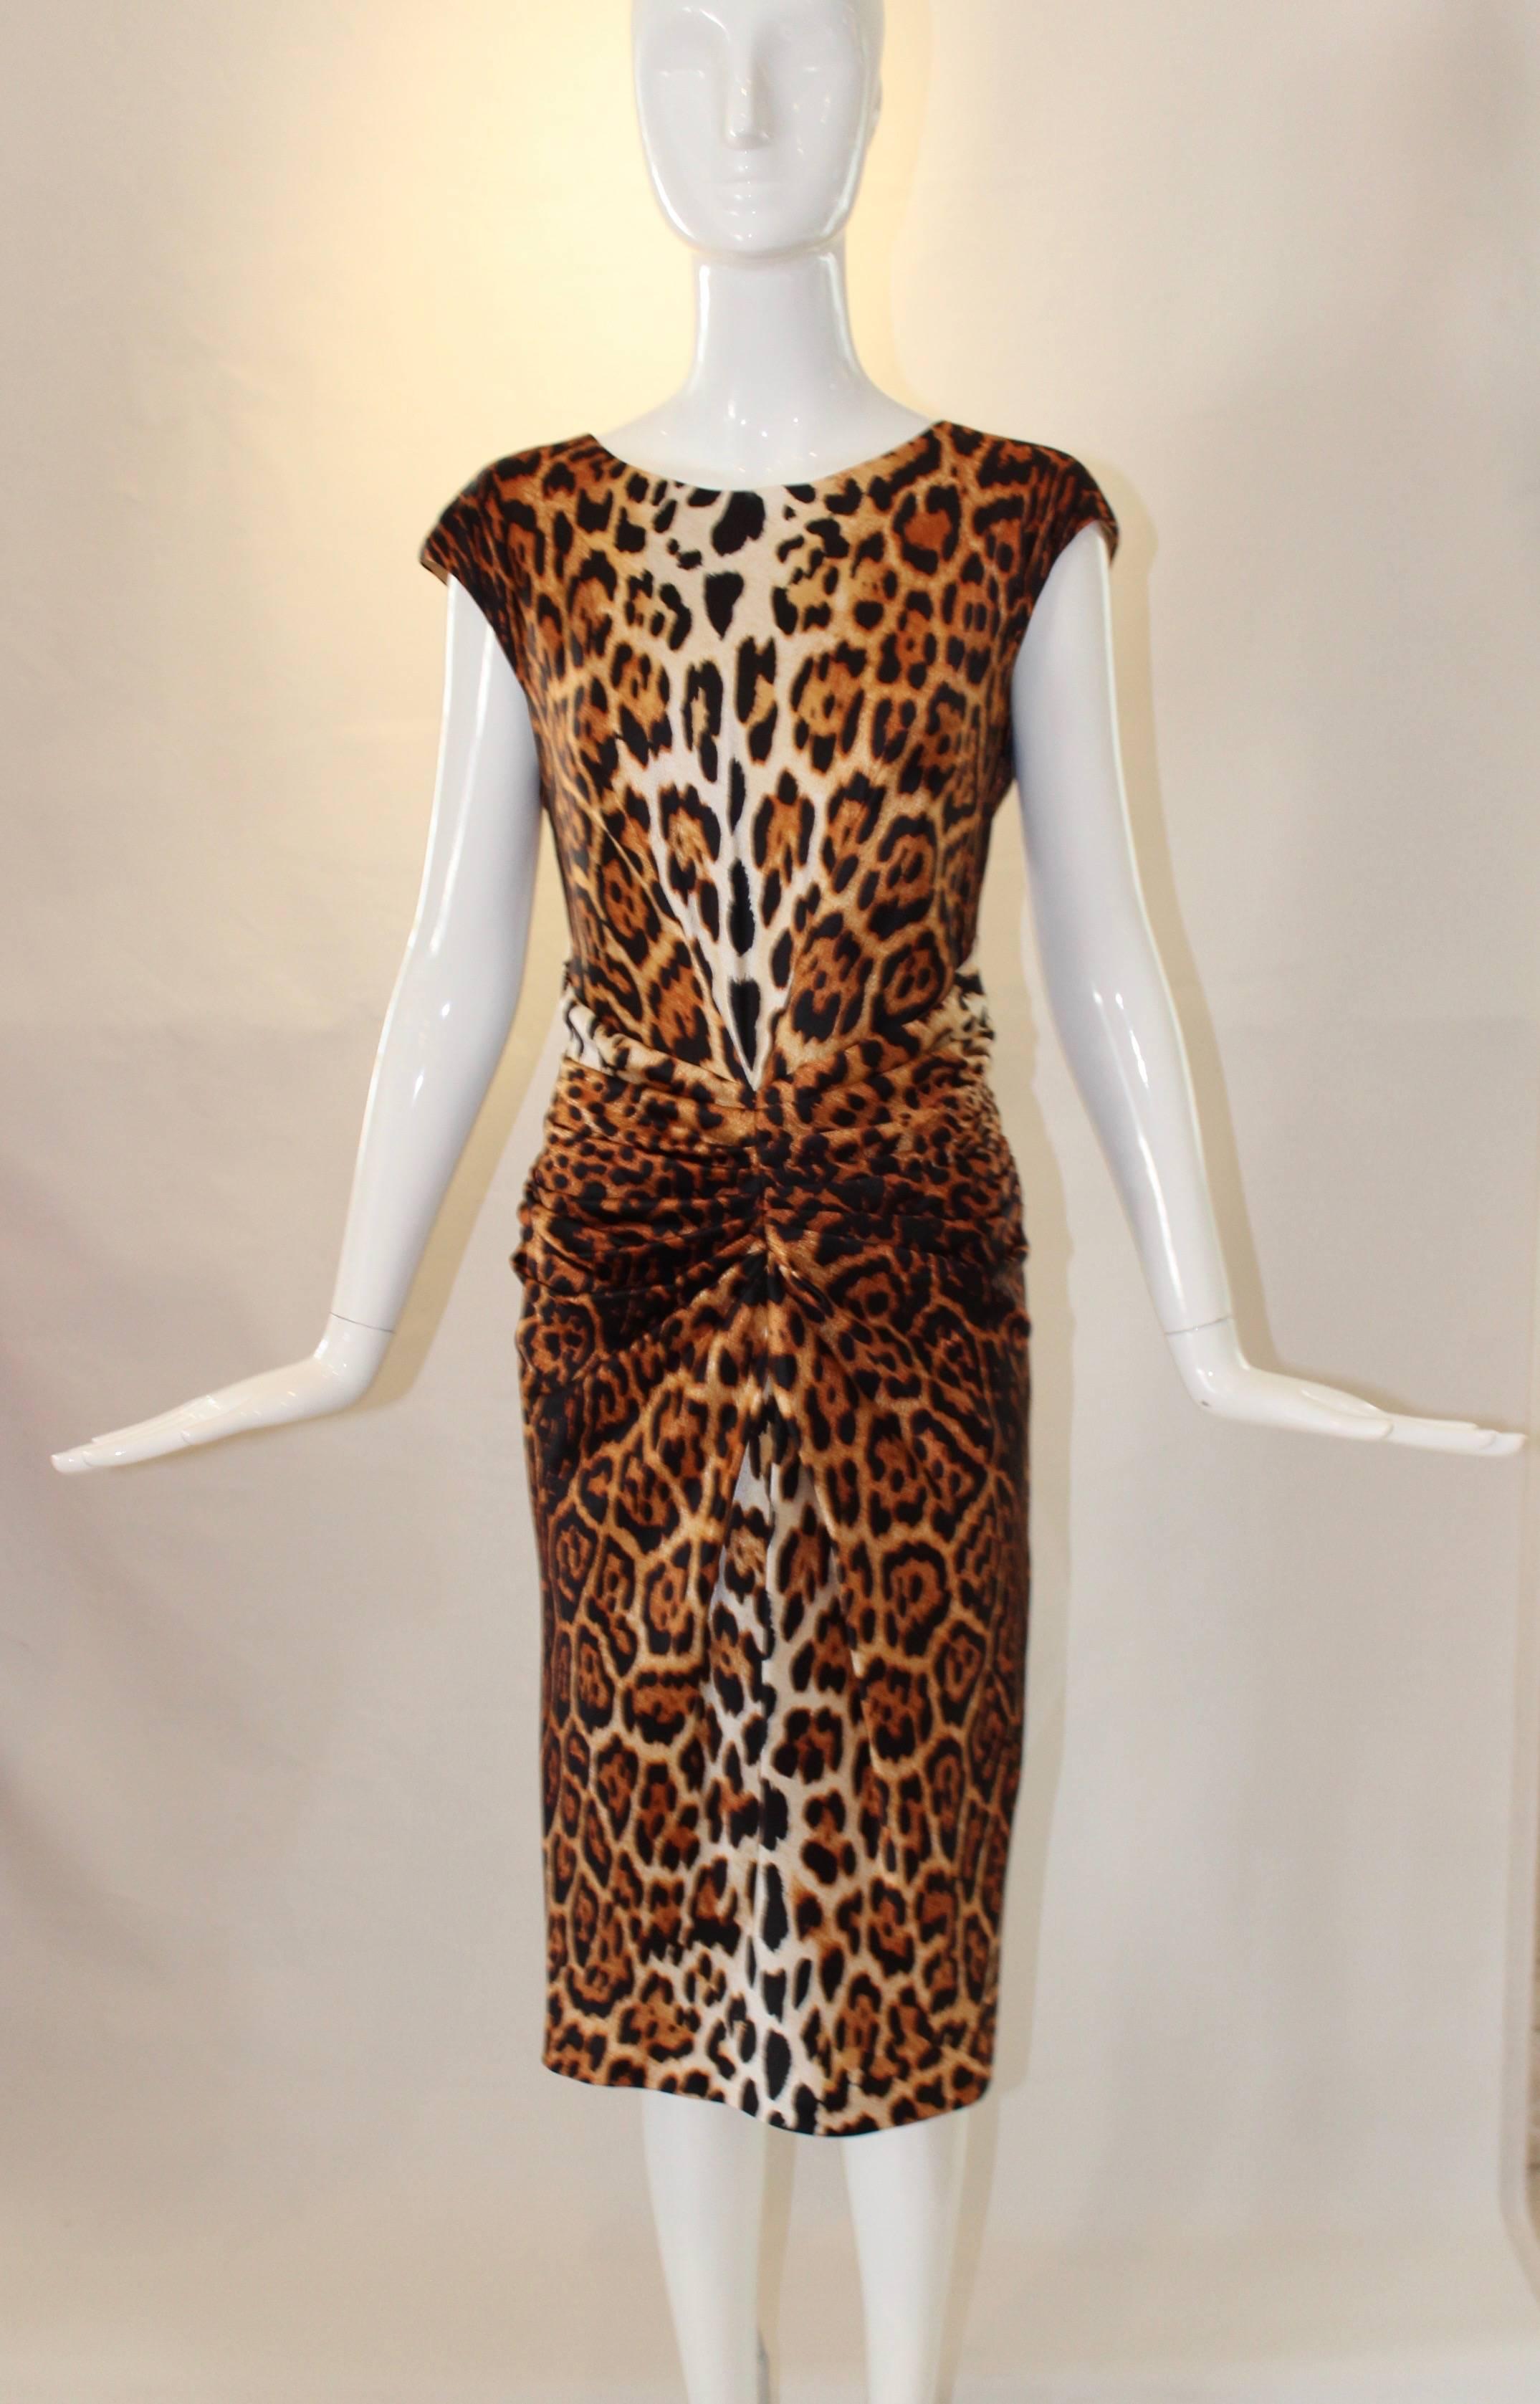 Bring out your inner wild child with this gorgeous Christian Dior Silk Leopard-Print Cocktail Dress. This sleeveless dress falls at the knee, has dramatic ruching around the waist, a scoop neckline, and a hidden zipper at the back. 

Length: